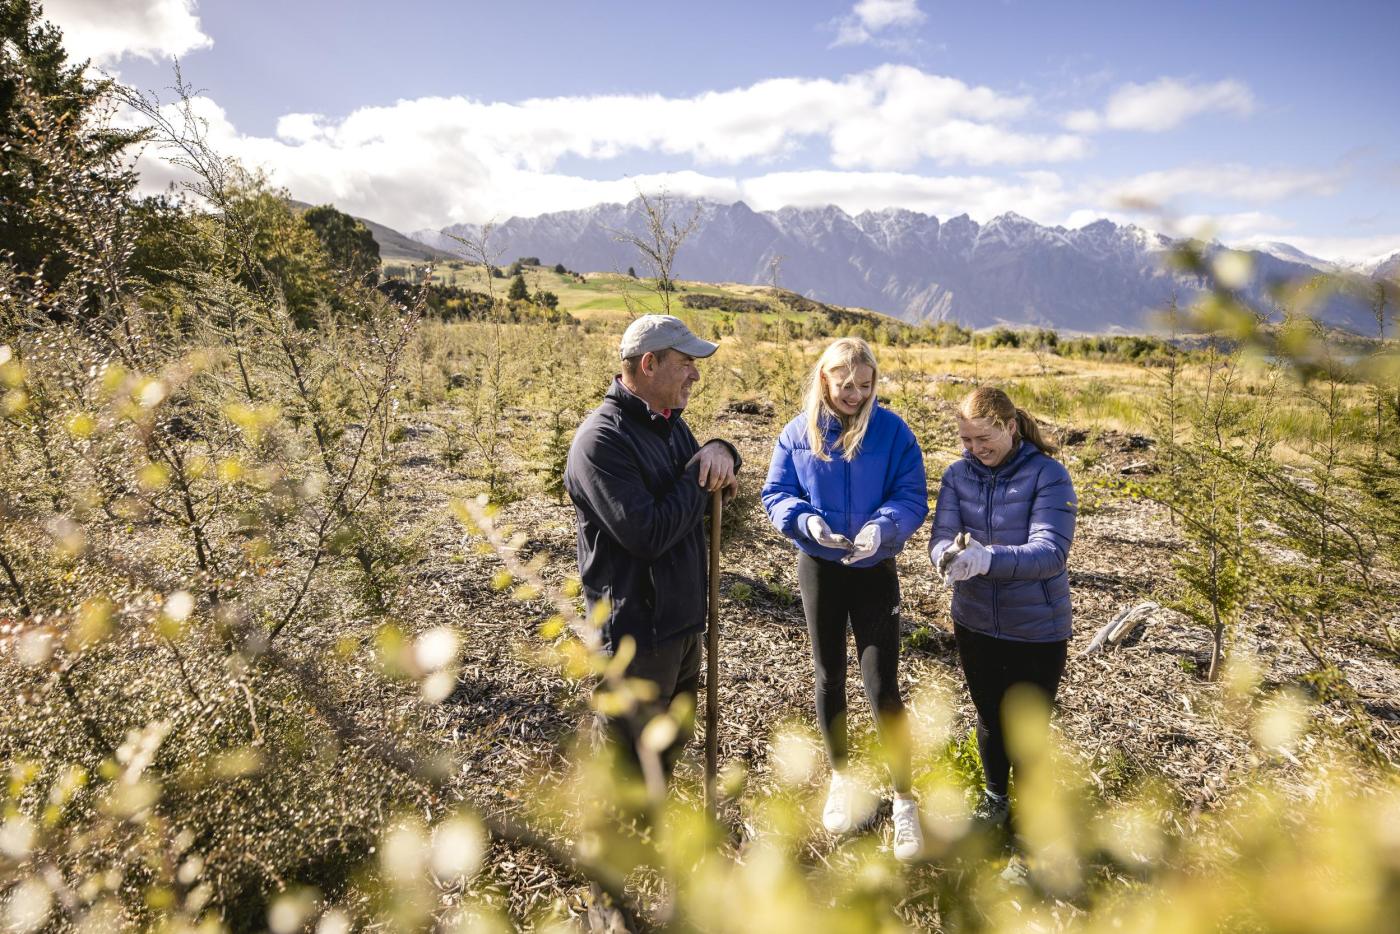 3 people working at a planting site in Queenstown, planting native trees to reforest the area with native bush